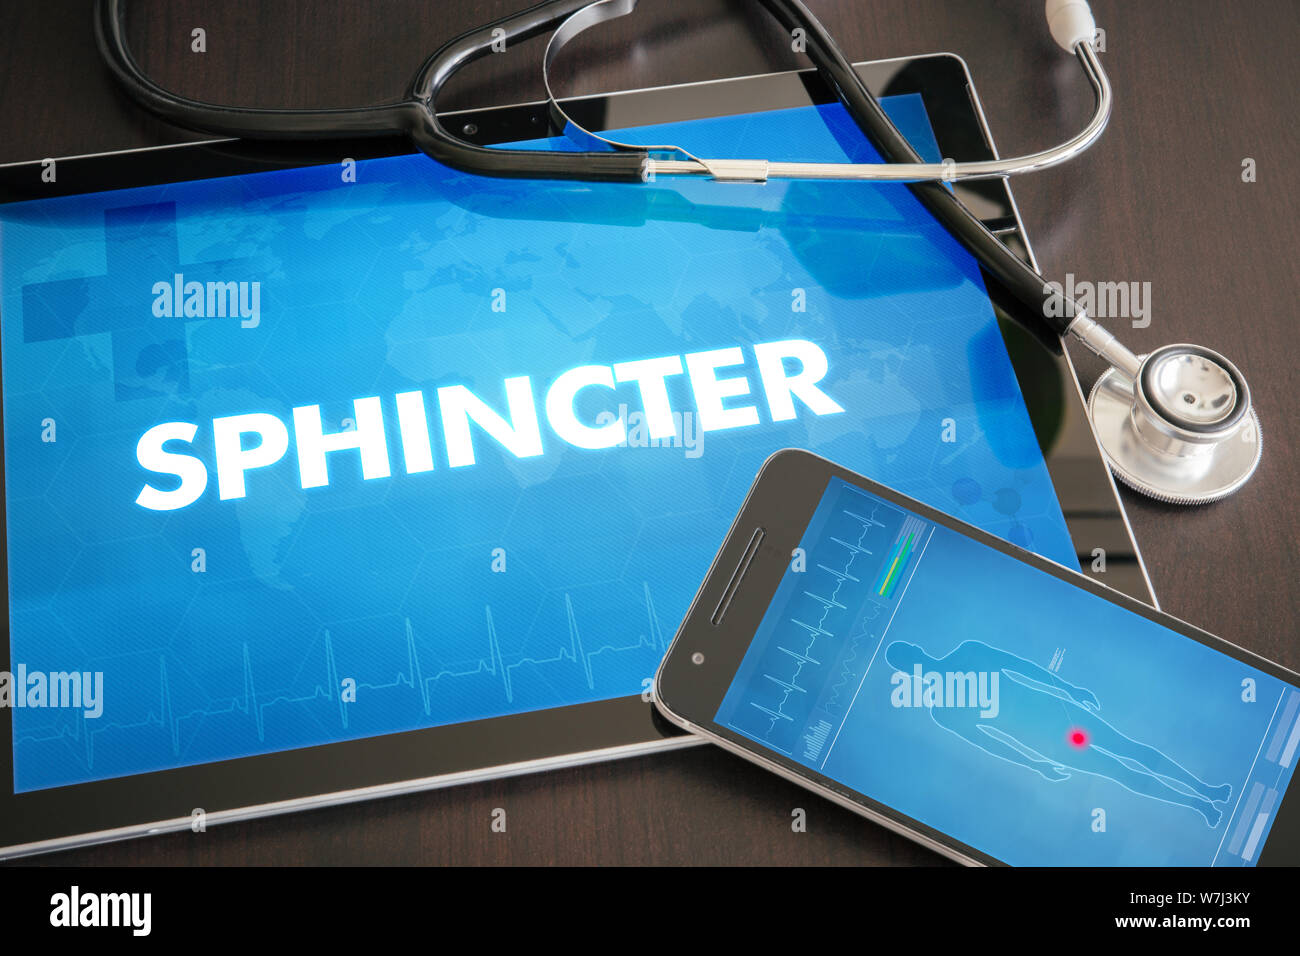 Sphincter (gastrointestinal disease related body part) diagnosis medical concept on tablet screen with stethoscope. Stock Photo